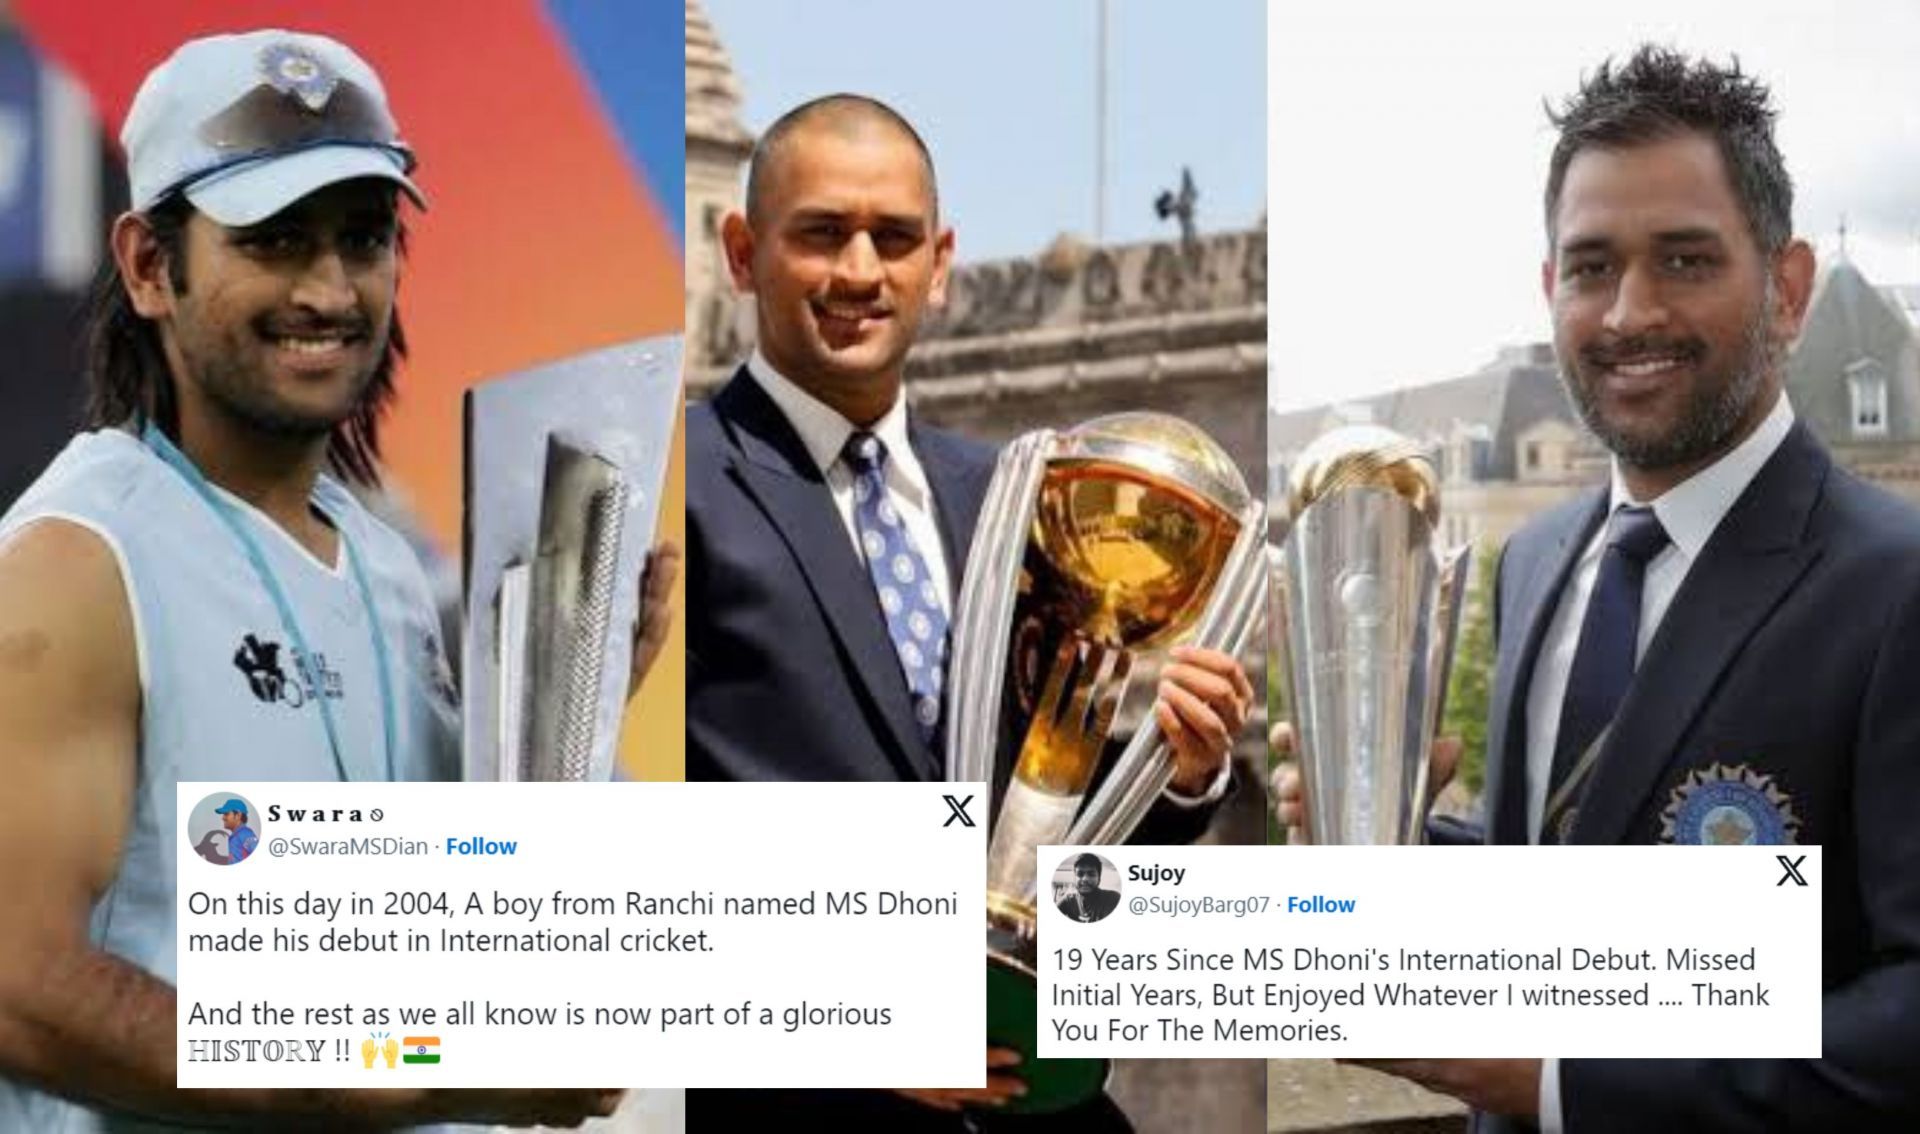 Fans hail MS Dhoni on 19th anniversary of his international cricket debut.